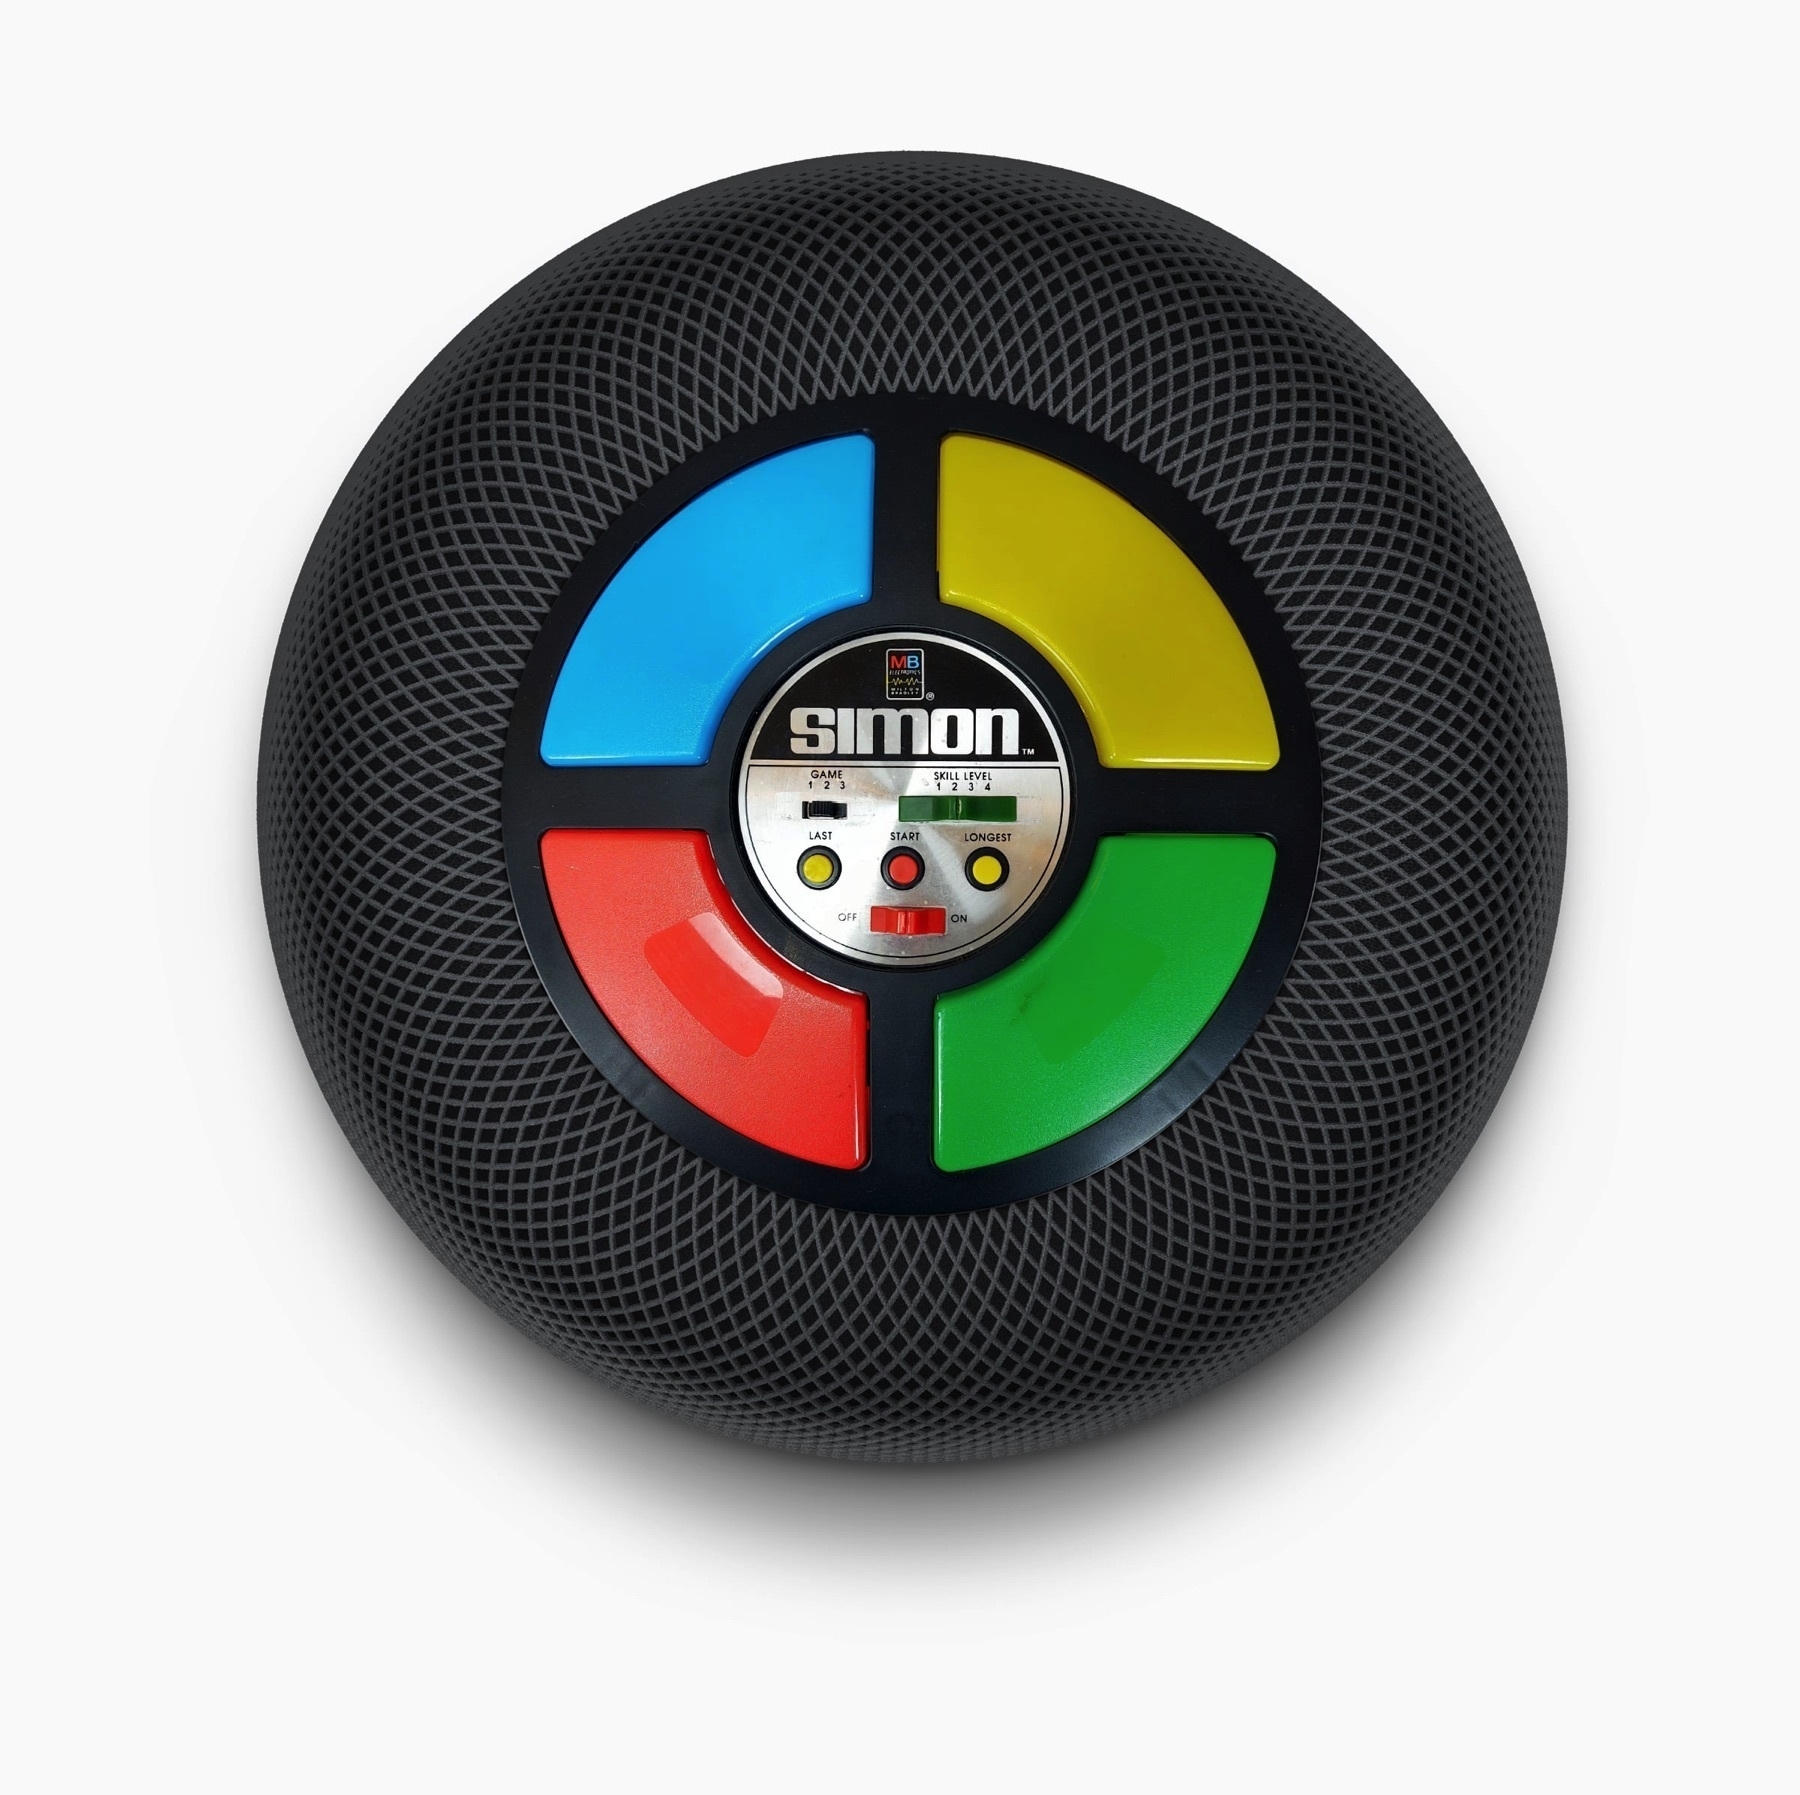 Simon game on the top of a black HomePod